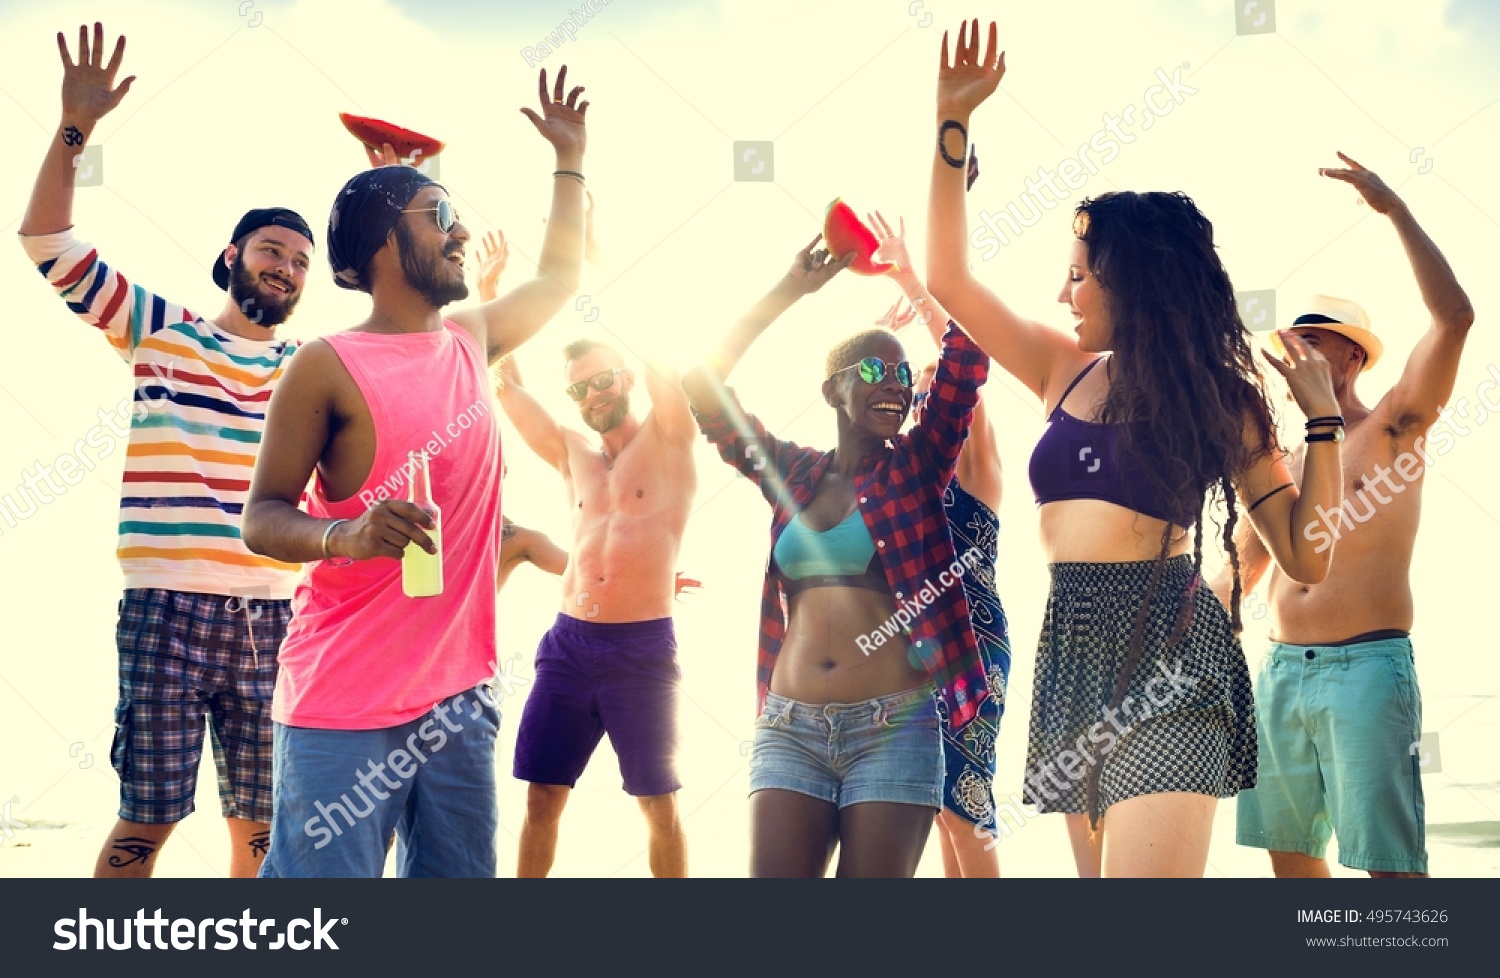 Diverse Young People Fun Beach Concept Stock Photo 495743626 : Shutterstock